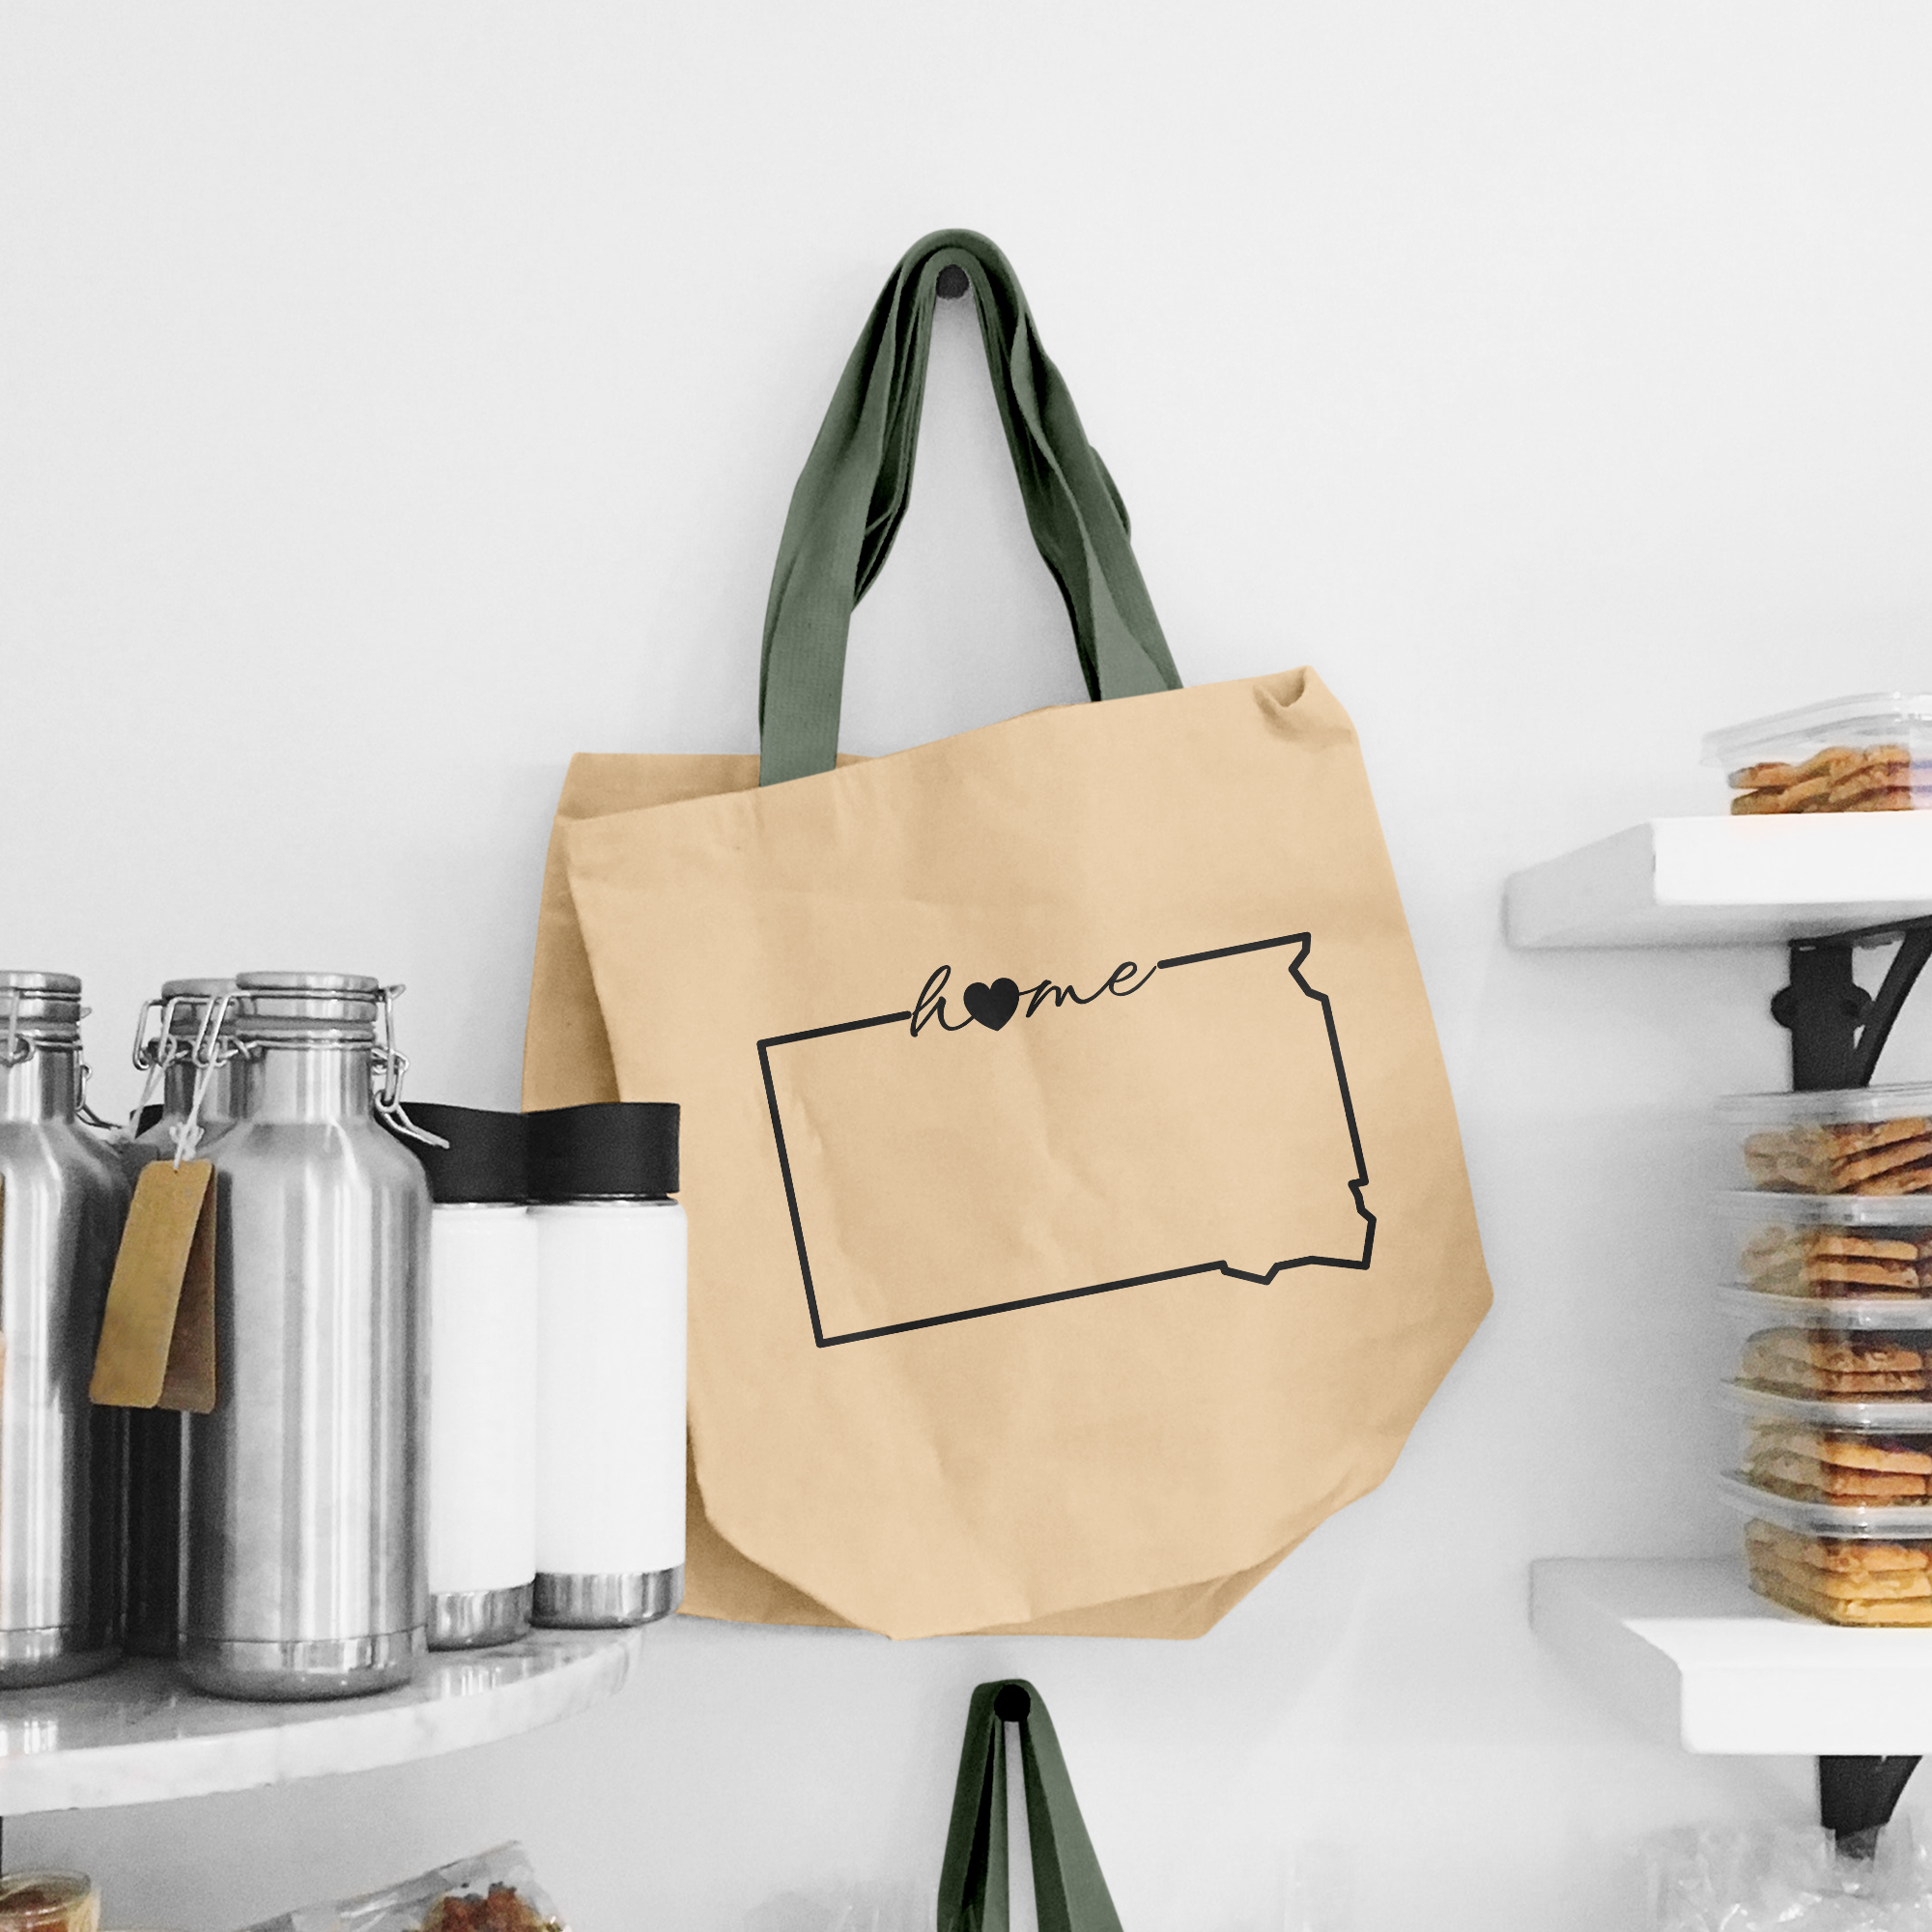 Black illustration of map of South Dakota on the beige shopping bag with dirty green handle.